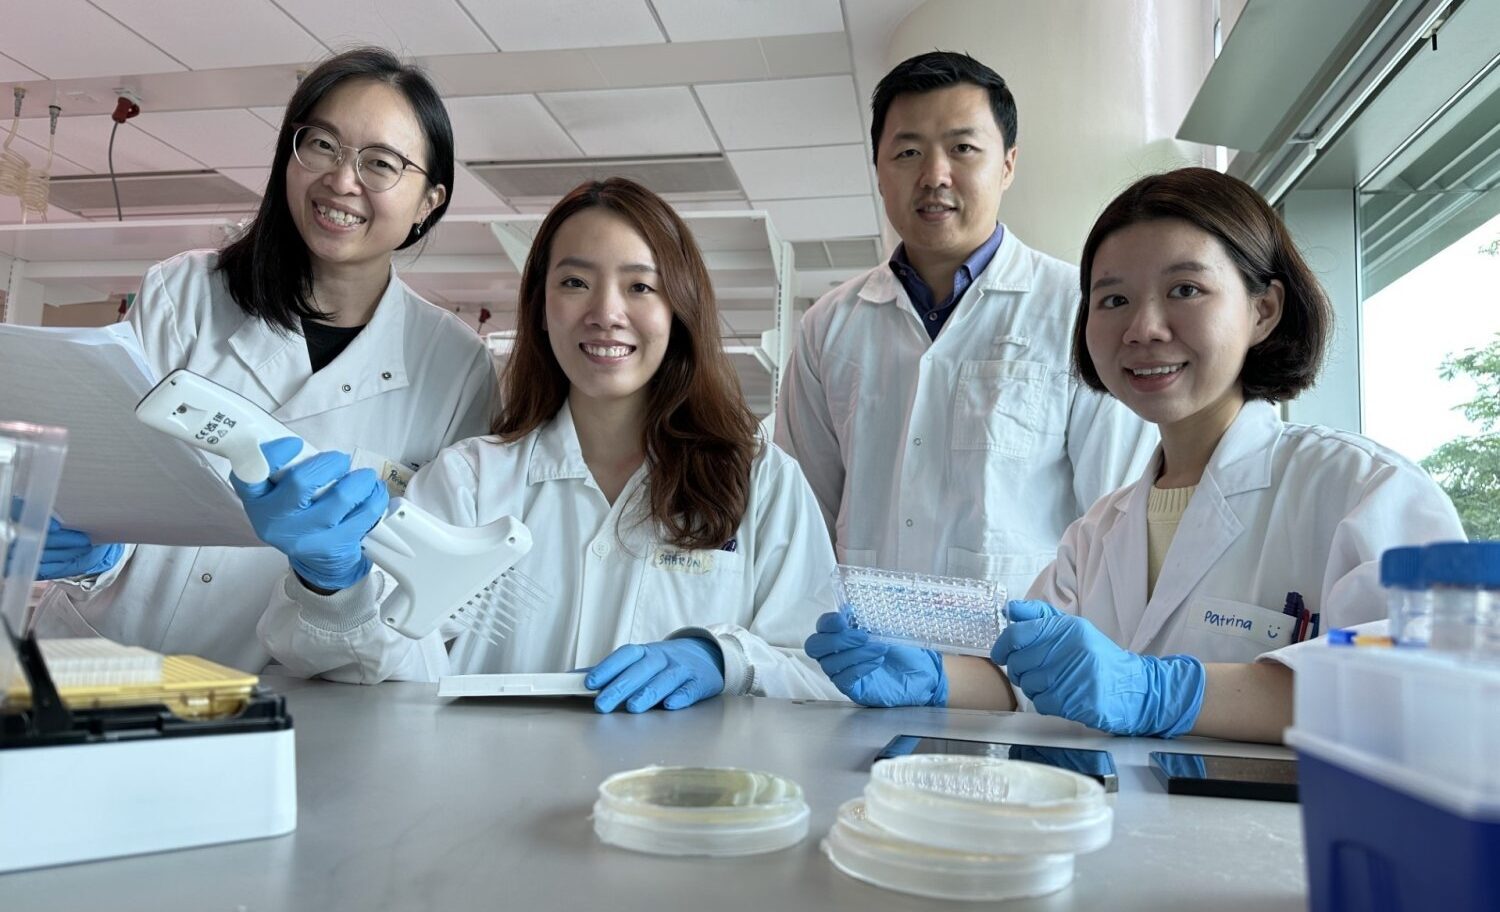 SMART AMR researchers (from left to right): Peiying Ho, Sharon Ling, Boon Chong Goh, and Patrina Chua performed compound screening to identify novel antibiotic combinations.